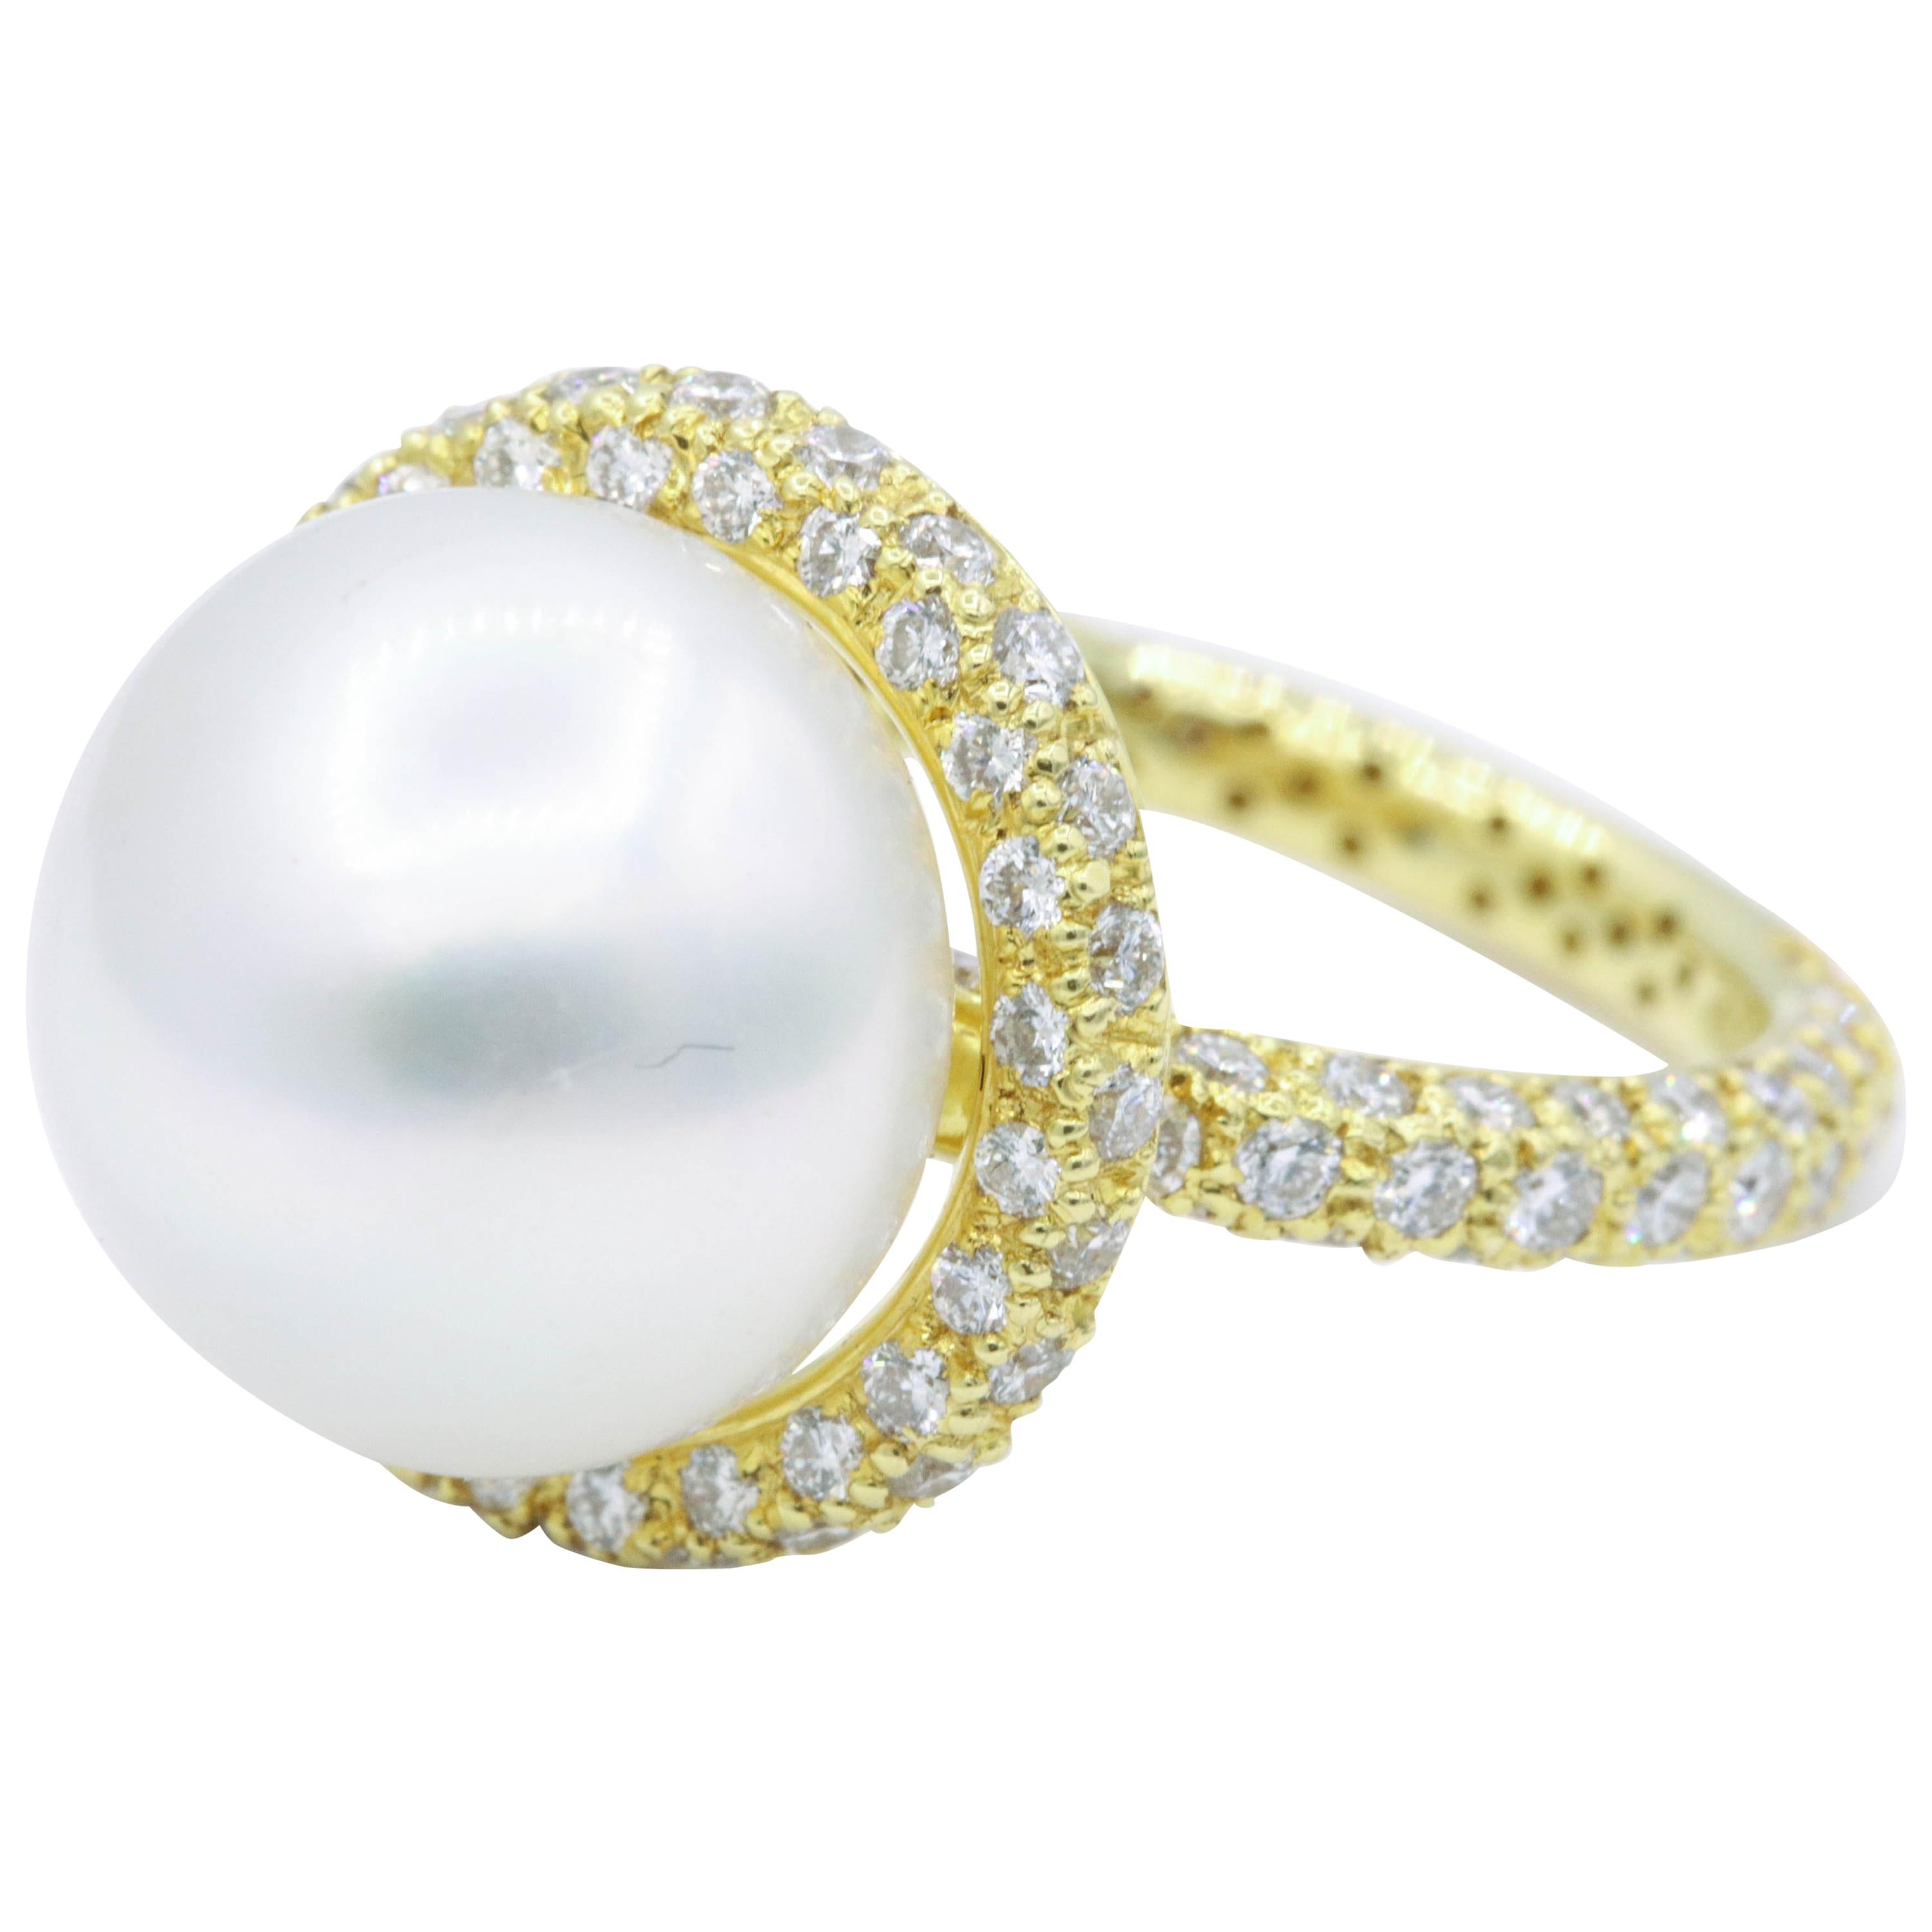 Yellow Gold Diamond and Pearl Ring, 1.57 Carat